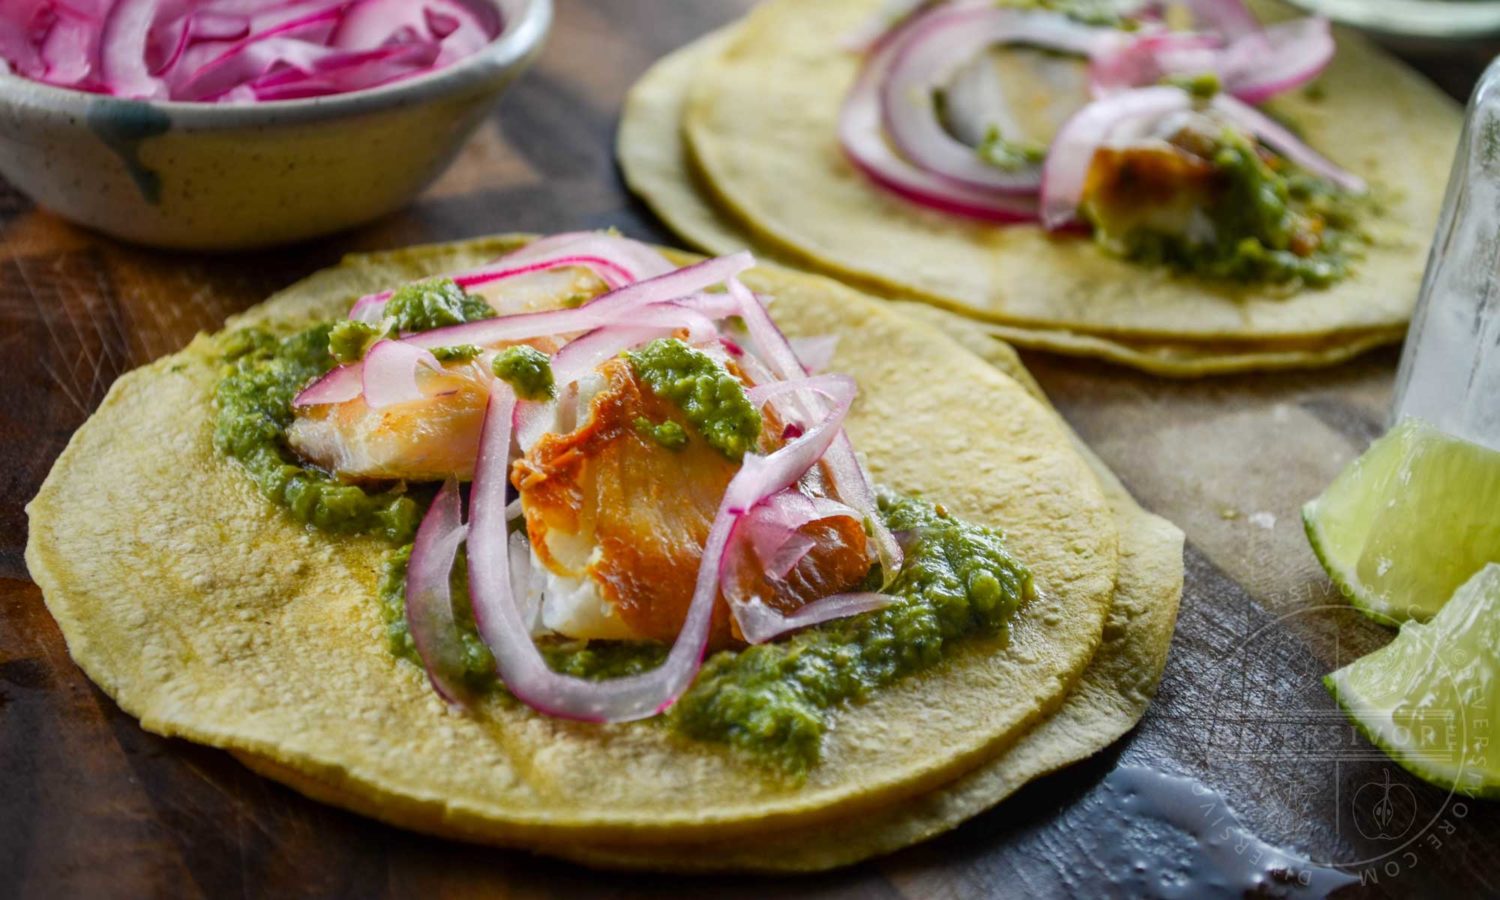 Halibut cheek tacos with roasted corn, garlic, and cilantro salsa and pickled red onions - Diversivore.com